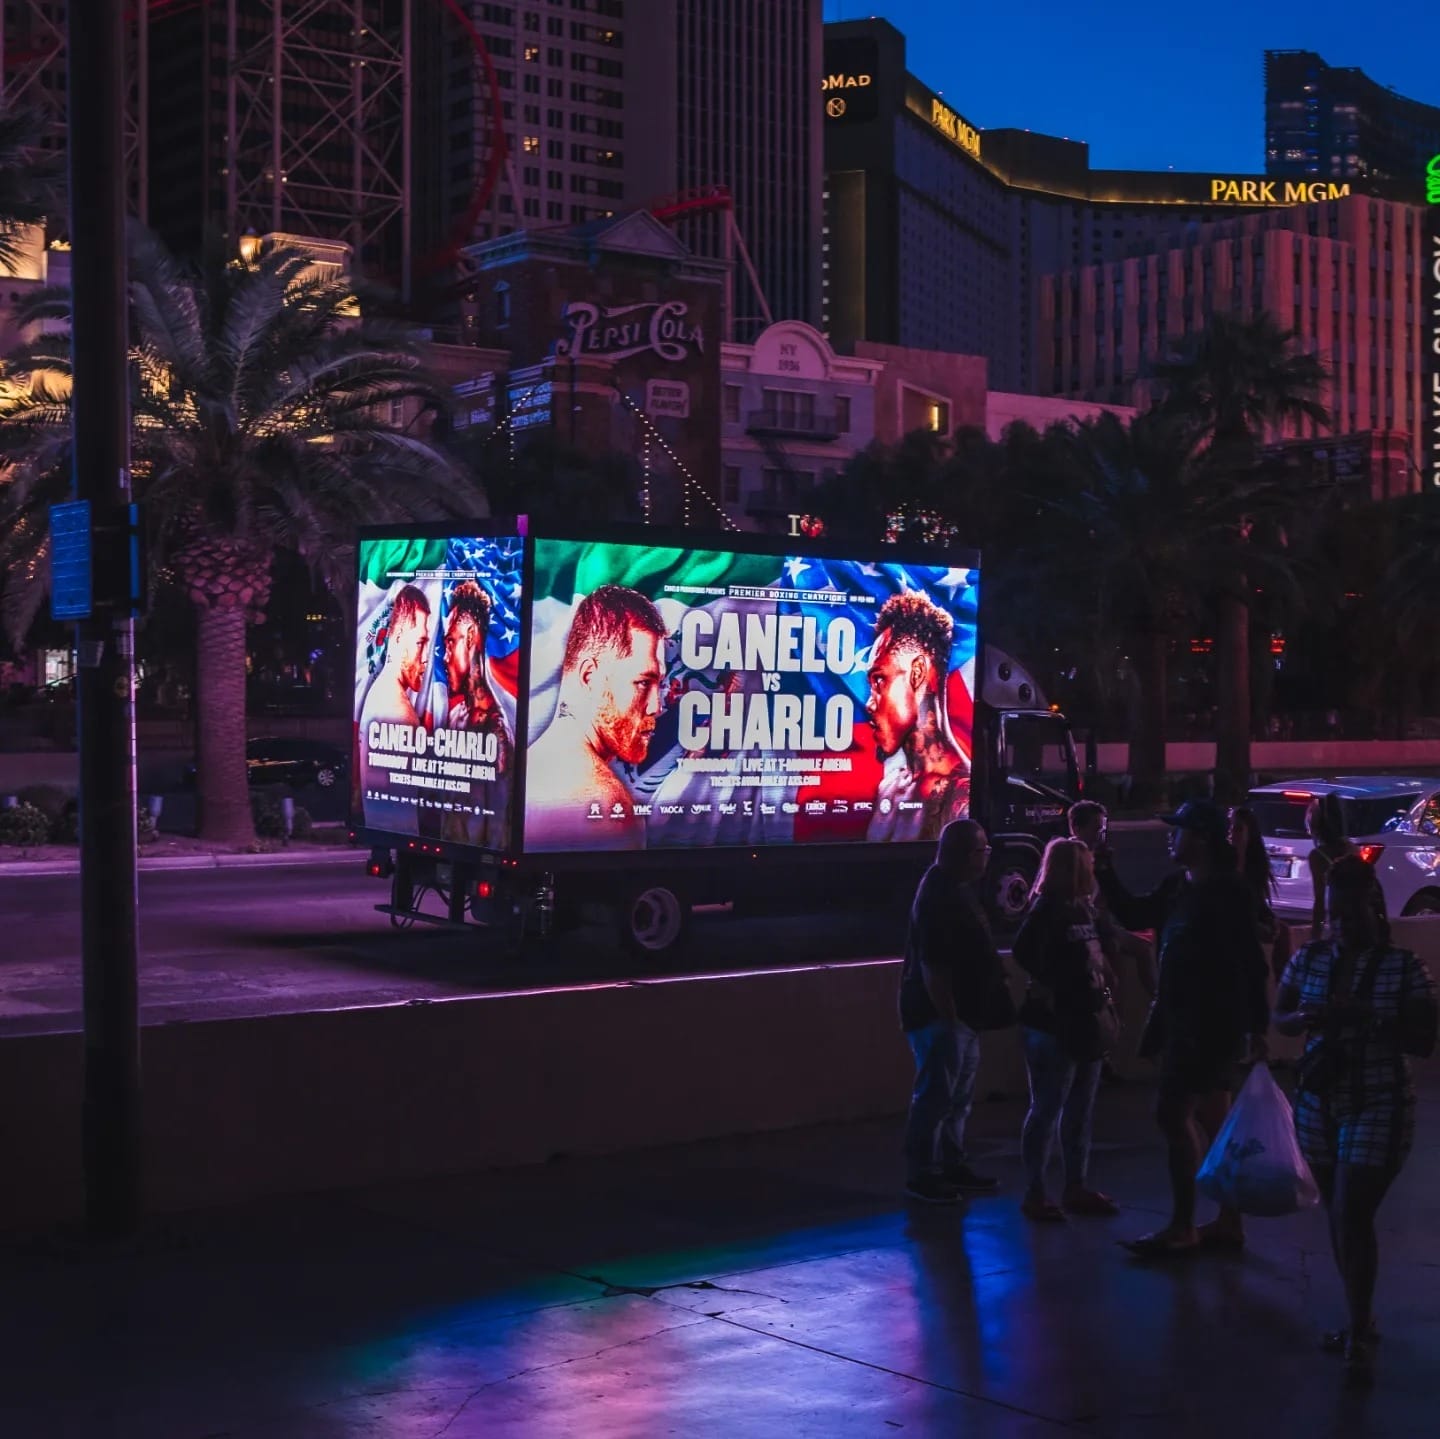 Illuminated mobile billboard for a boxing match at night.